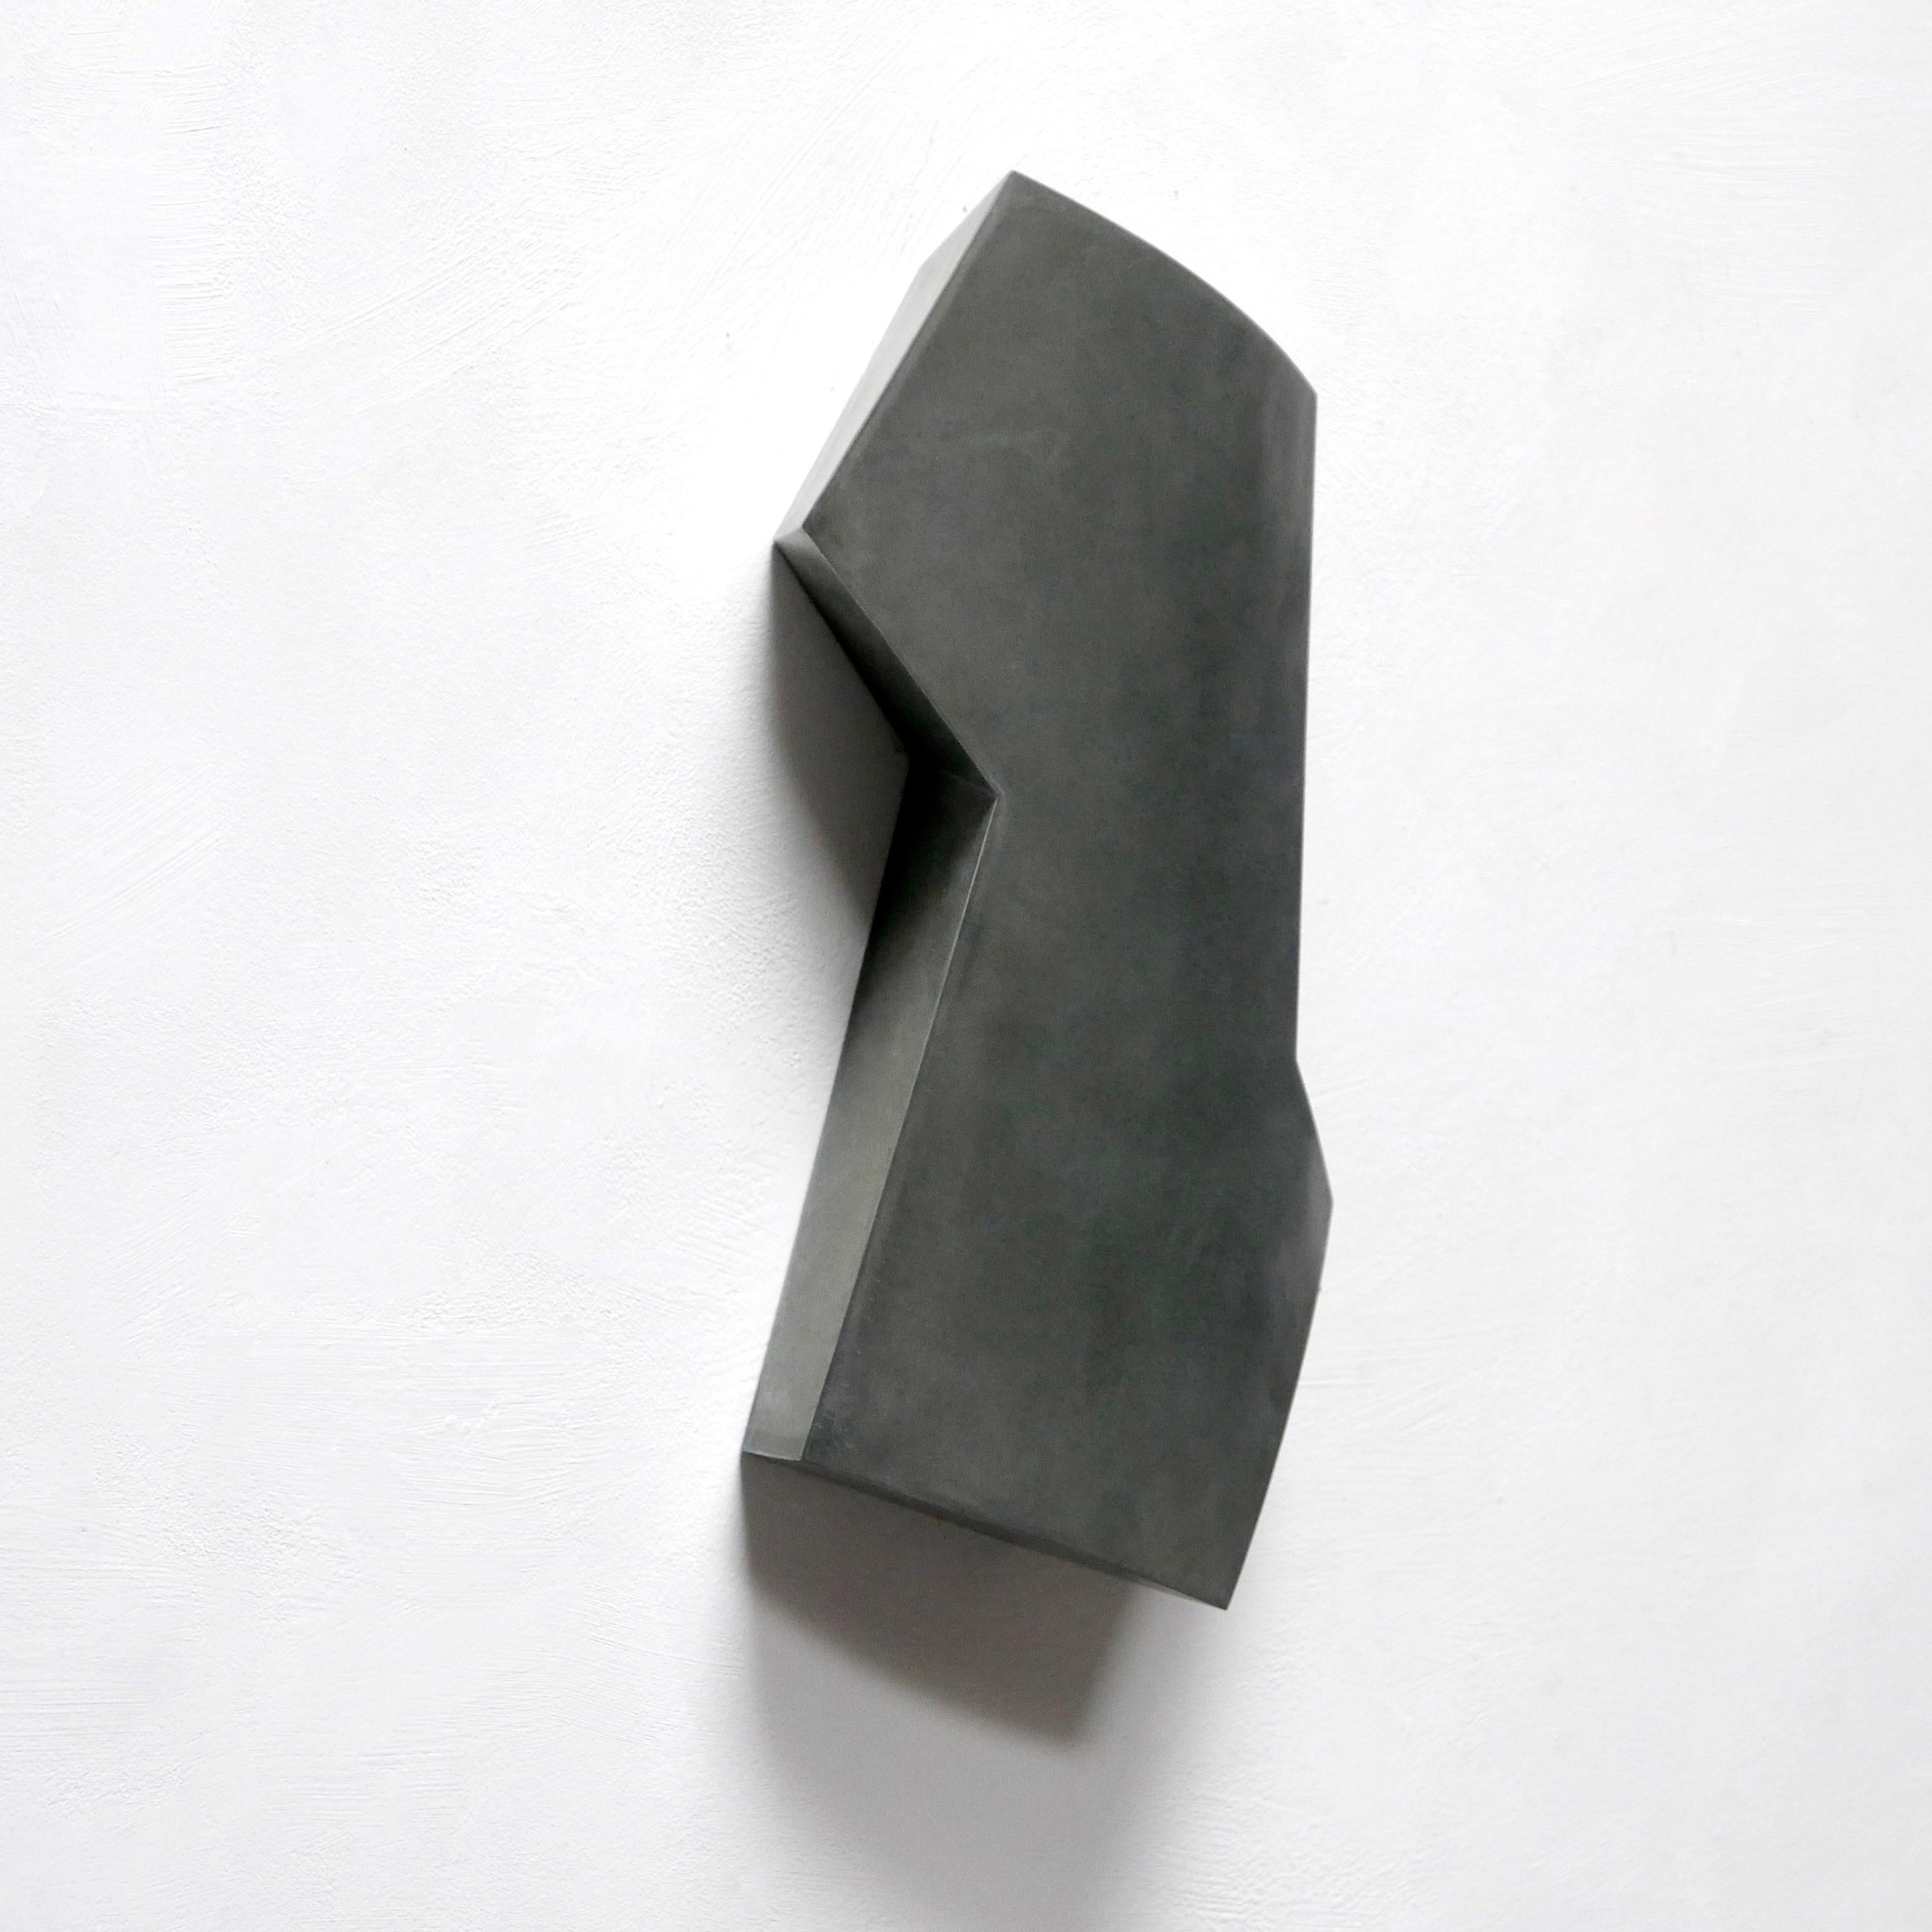 Simon Oud (b.1958, NL) creates sculptures which are mainly constructed from zinc, sometimes combined with brass elements. Oud is not a sculptor, as he does not cut into a mass. He does not start with a volume from which he takes parts away, but he